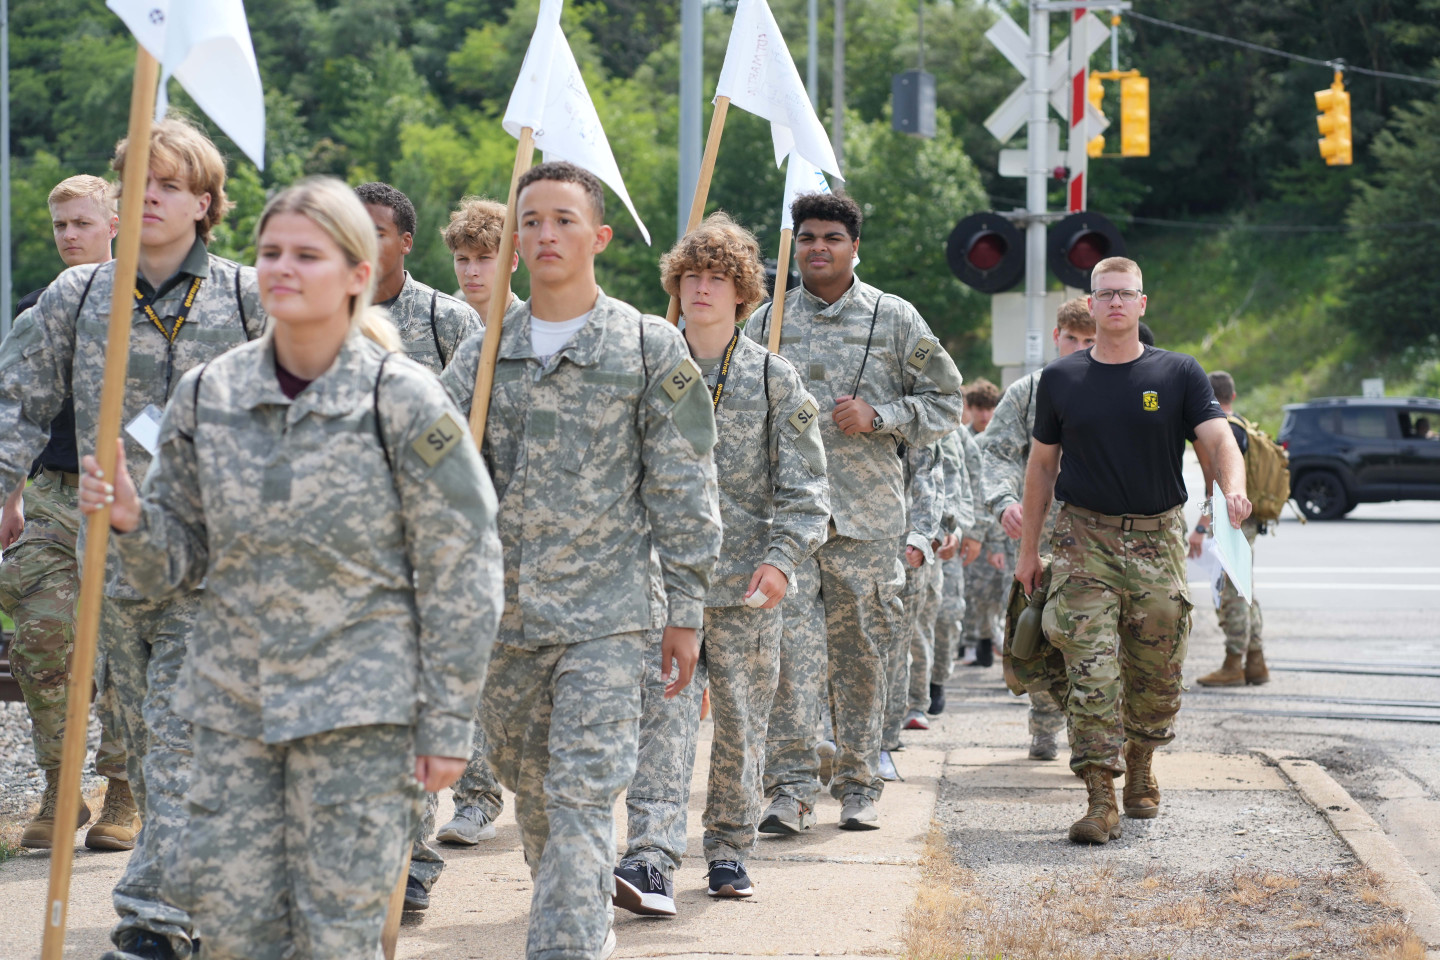 Members of Western's ROTC train on campus